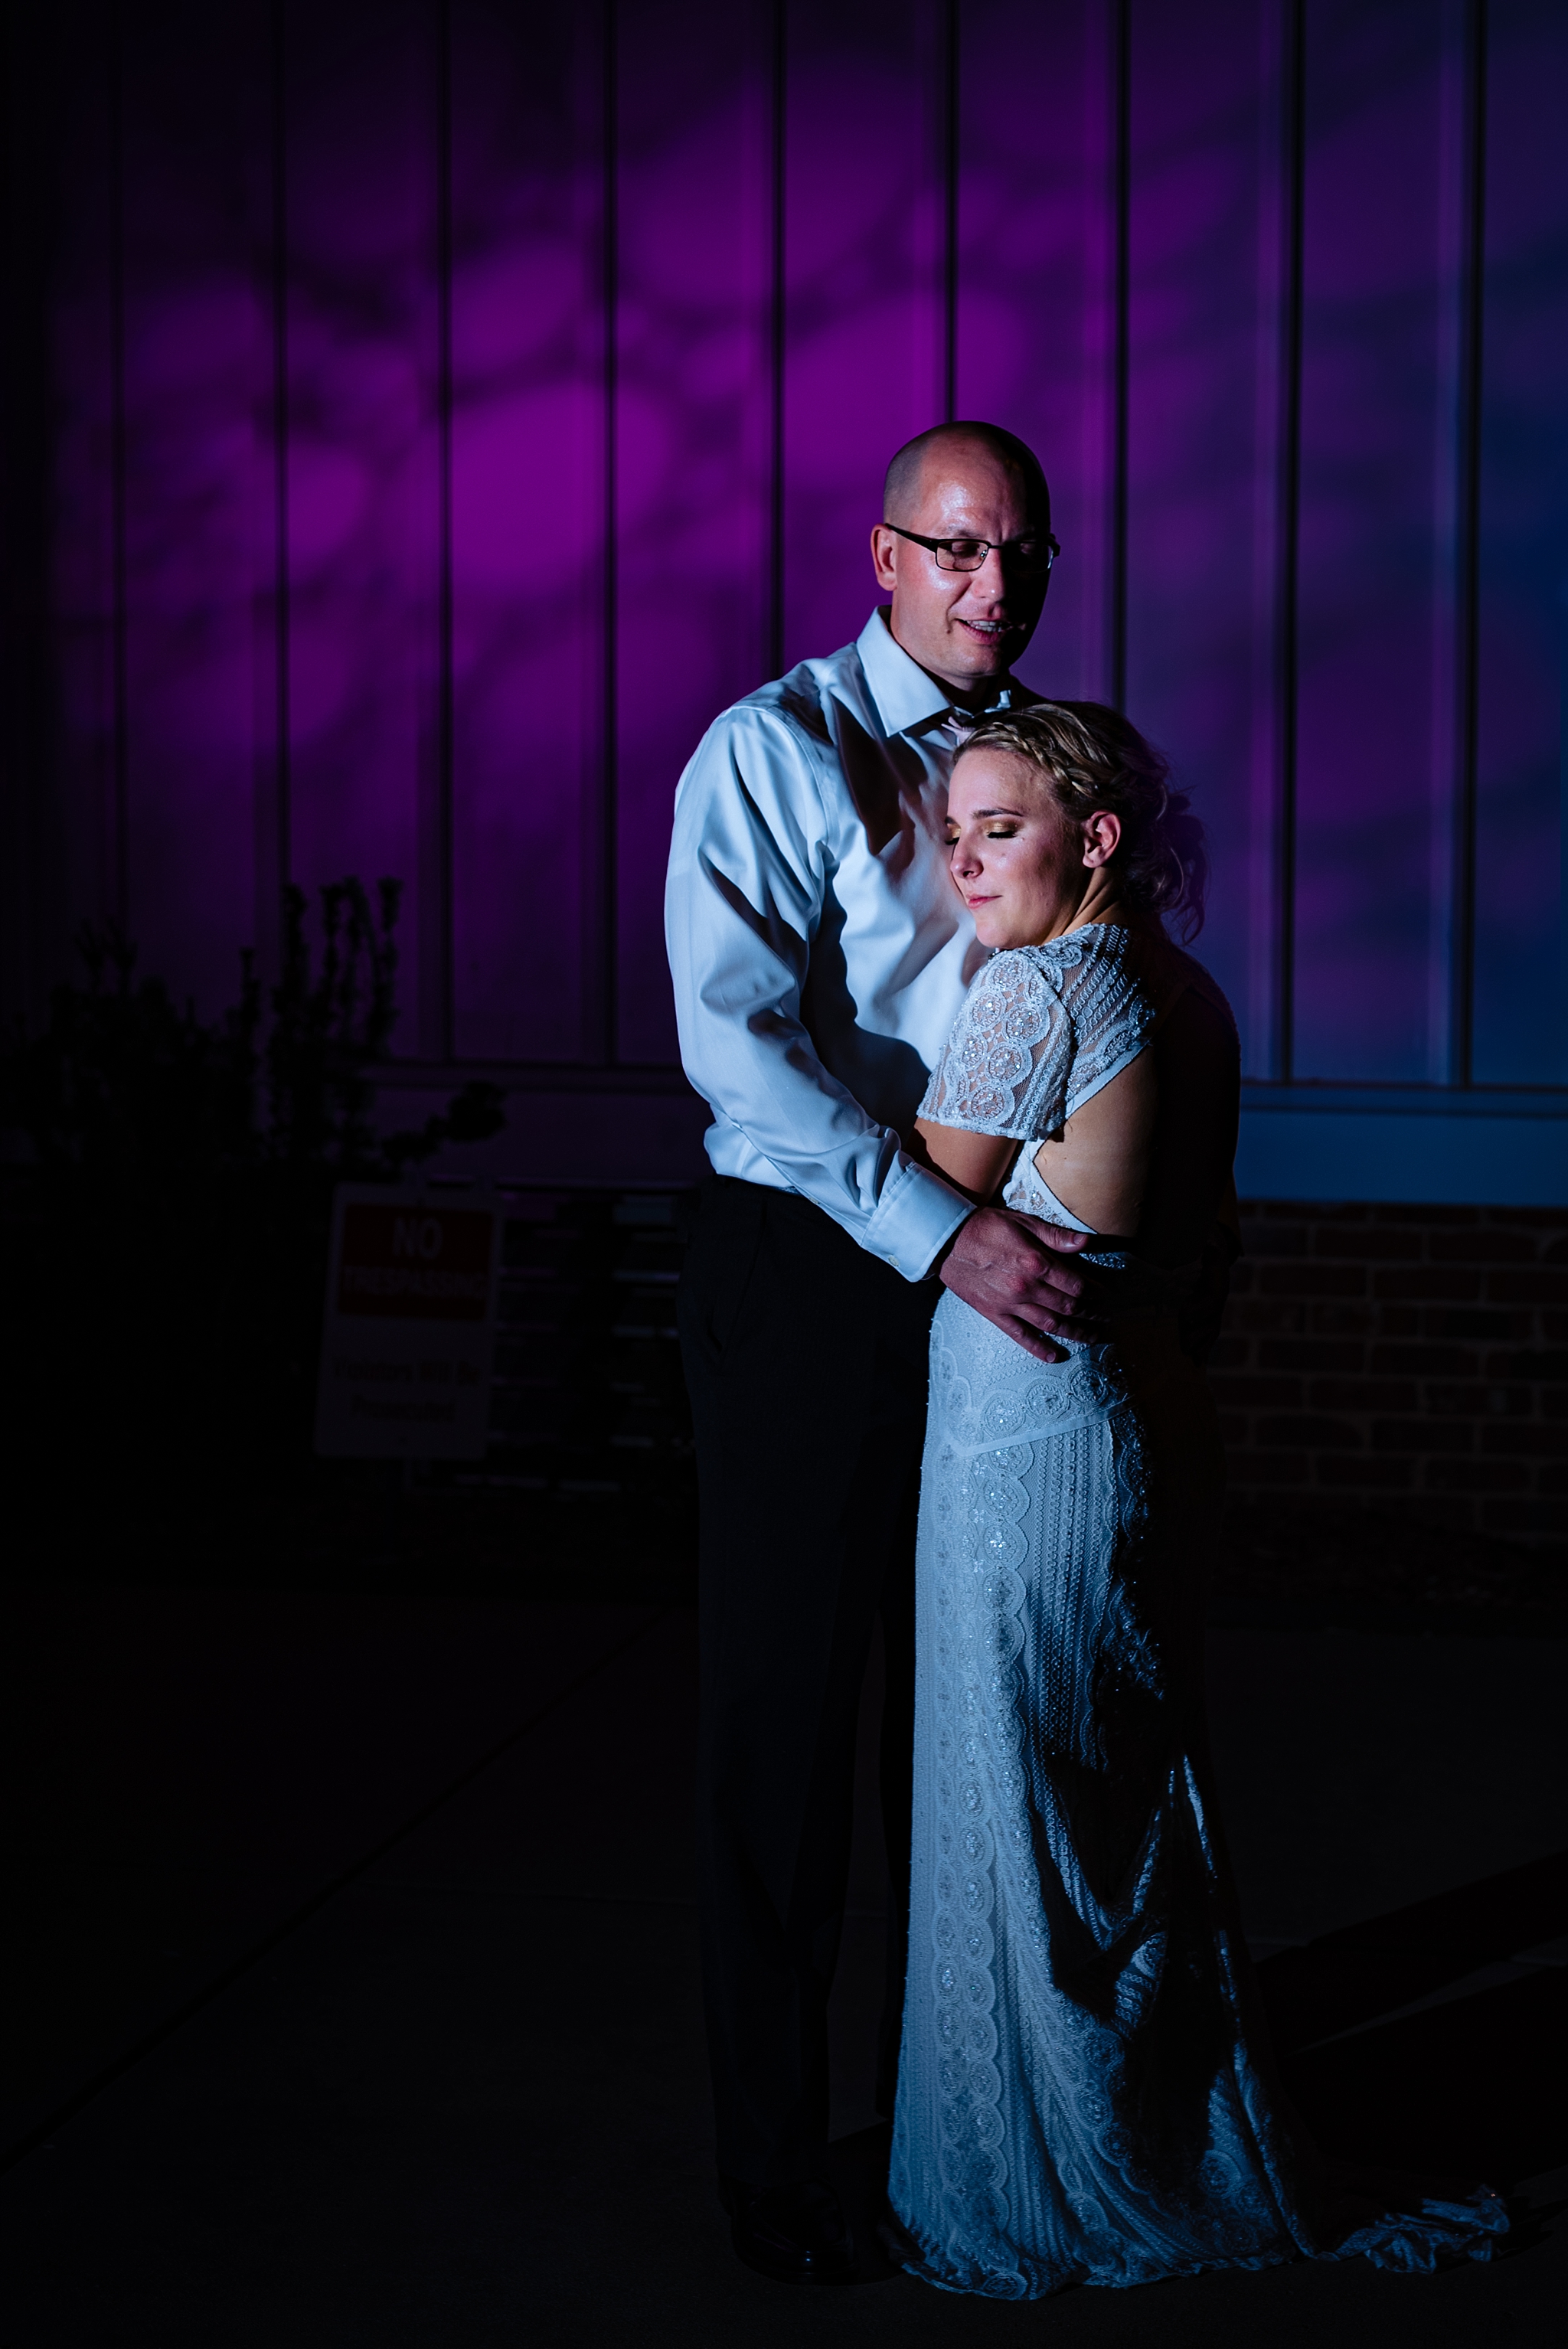 Bride and Groom pose for a dramatic night time portrait outside of their All Saints Chapel wedding